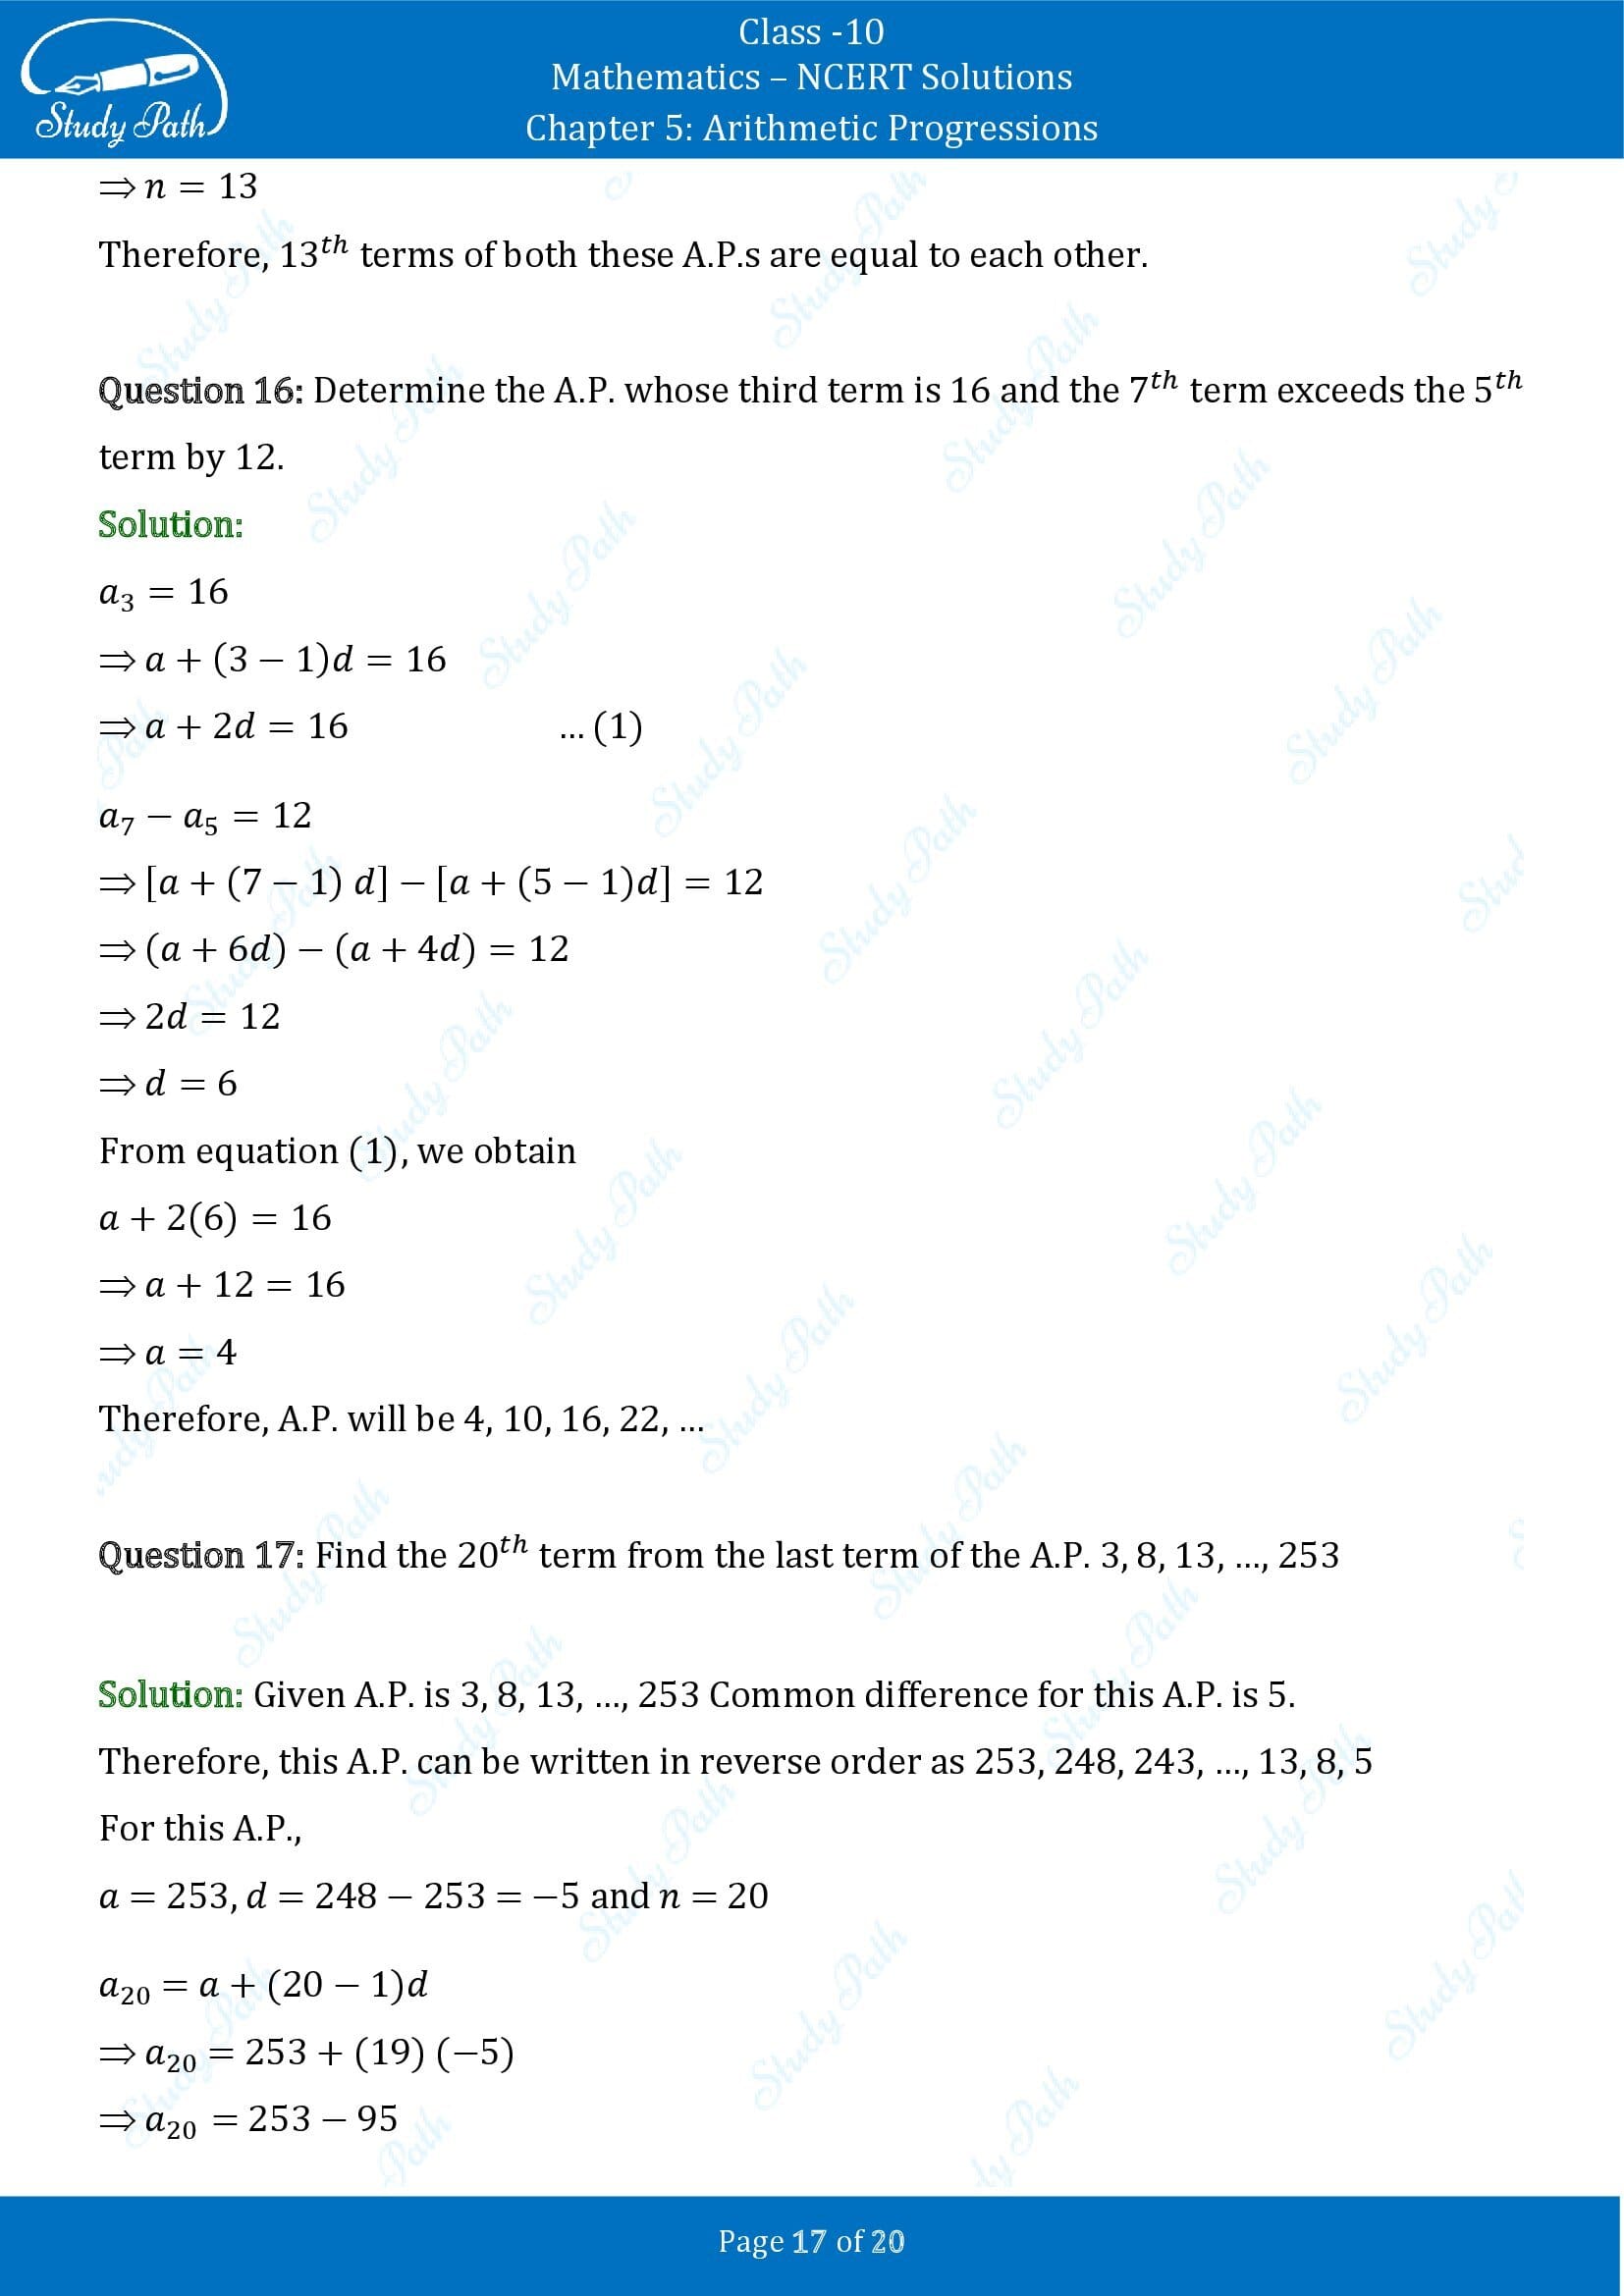 NCERT Solutions for Class 10 Maths Chapter 5 Arithmetic Progressions Exercise 5.2 00017